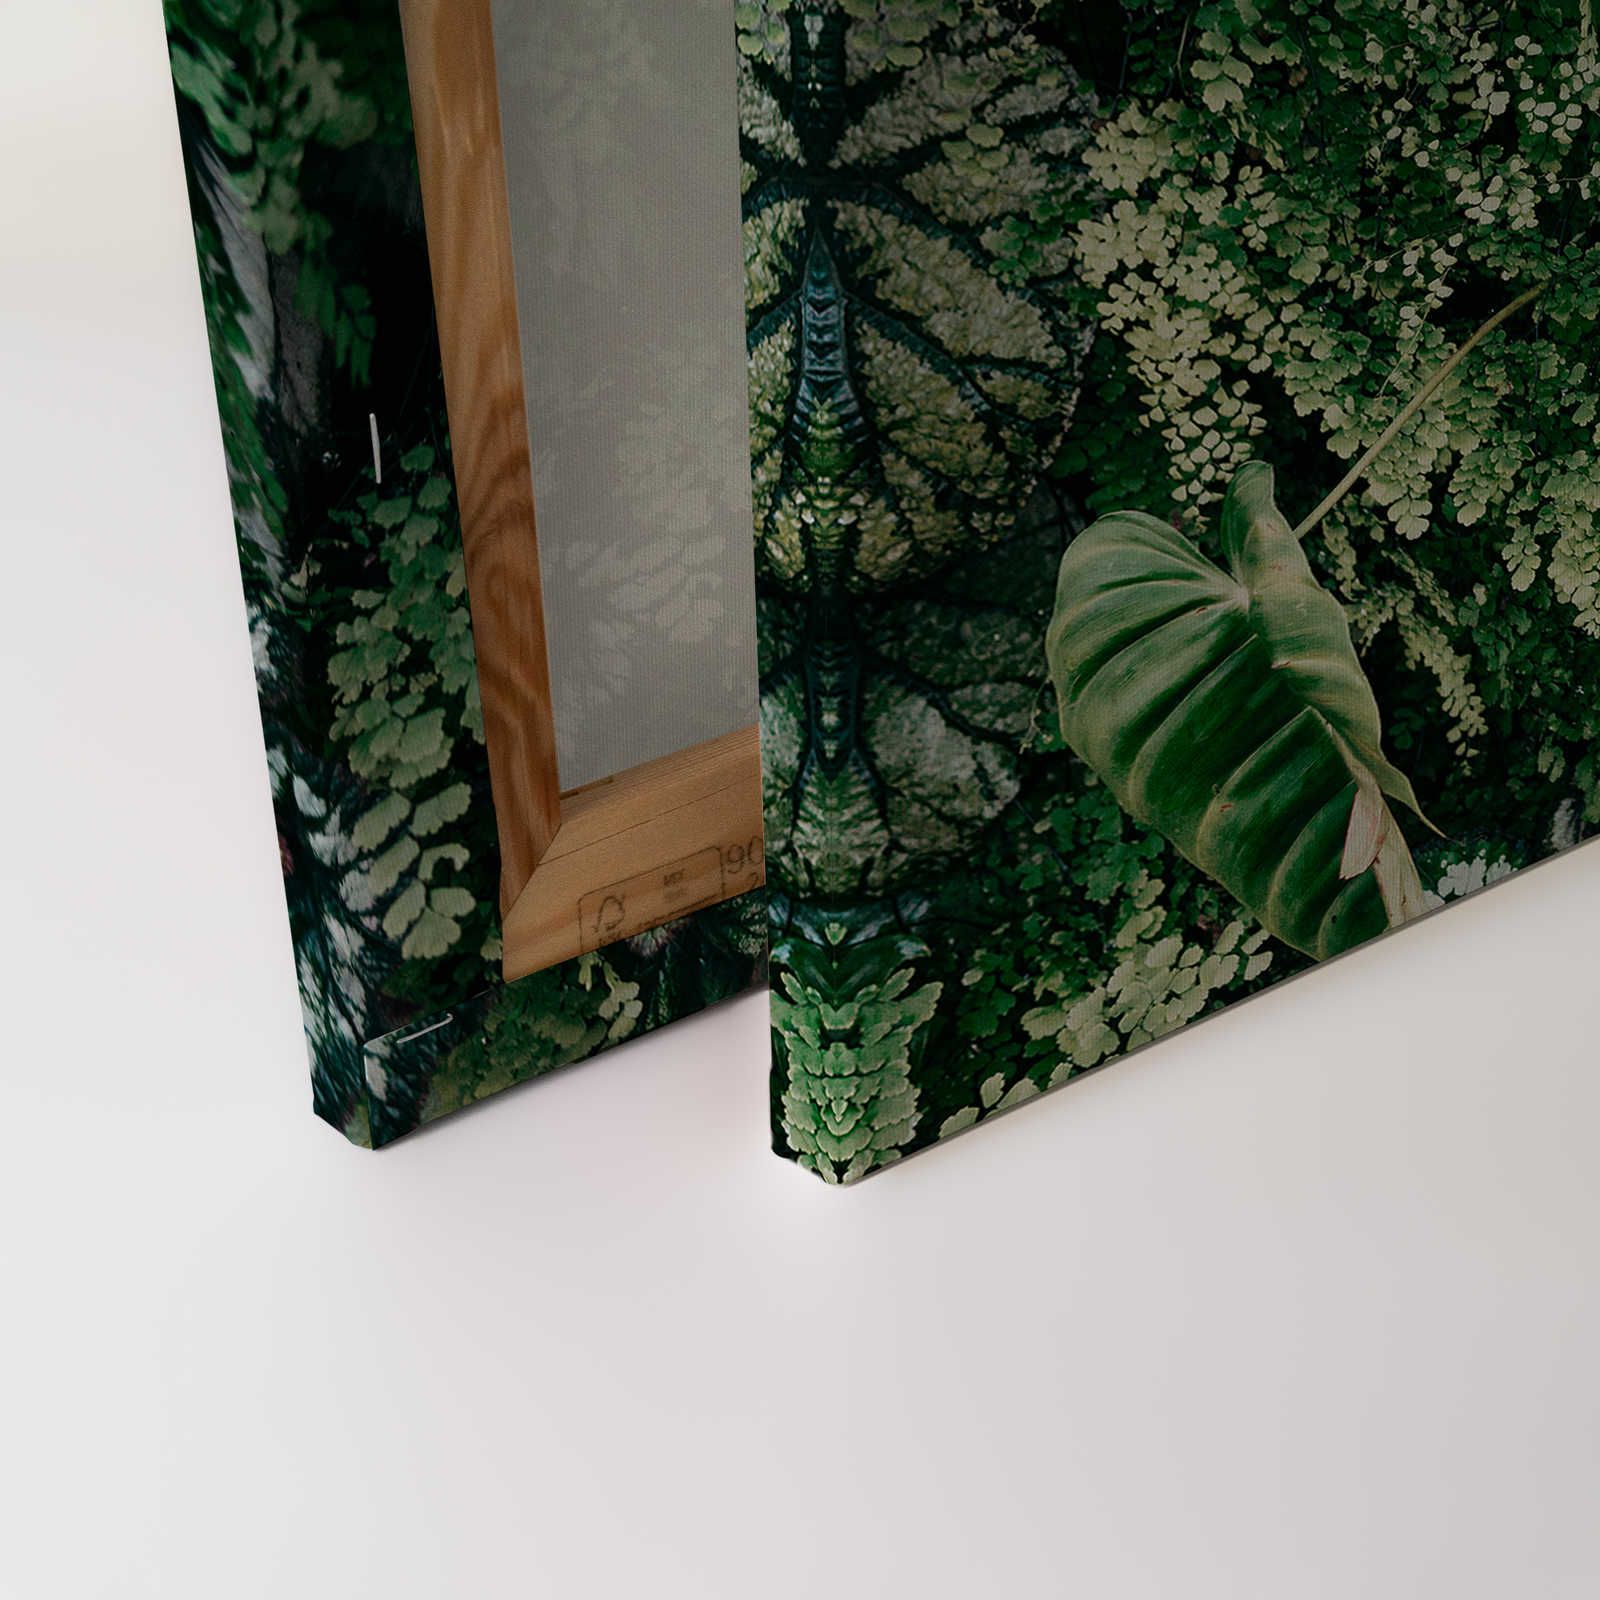             Deep Green 2 - Canvas painting Foliage thicket, ferns & hanging plants - 0.90 m x 0.60 m
        